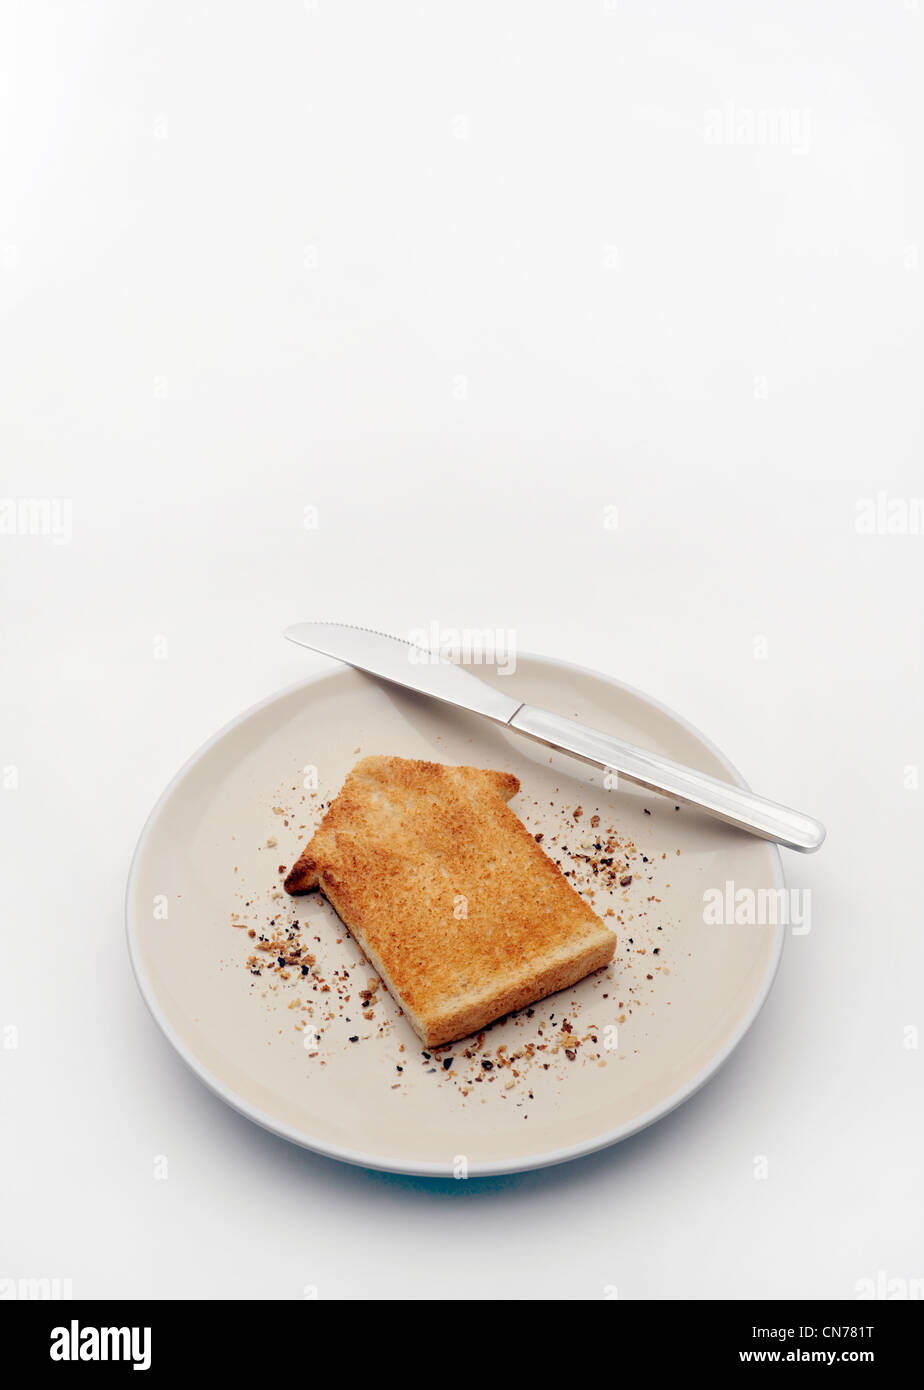 PIECE OF TOAST IN SHAPE OF HOUSE ON PLATE WITH KNIFE RE HOUSING MARKET PROPERTY HOME BUYING BUYERS FIRST TIME HOMES COSTS ETC UK Stock Photo